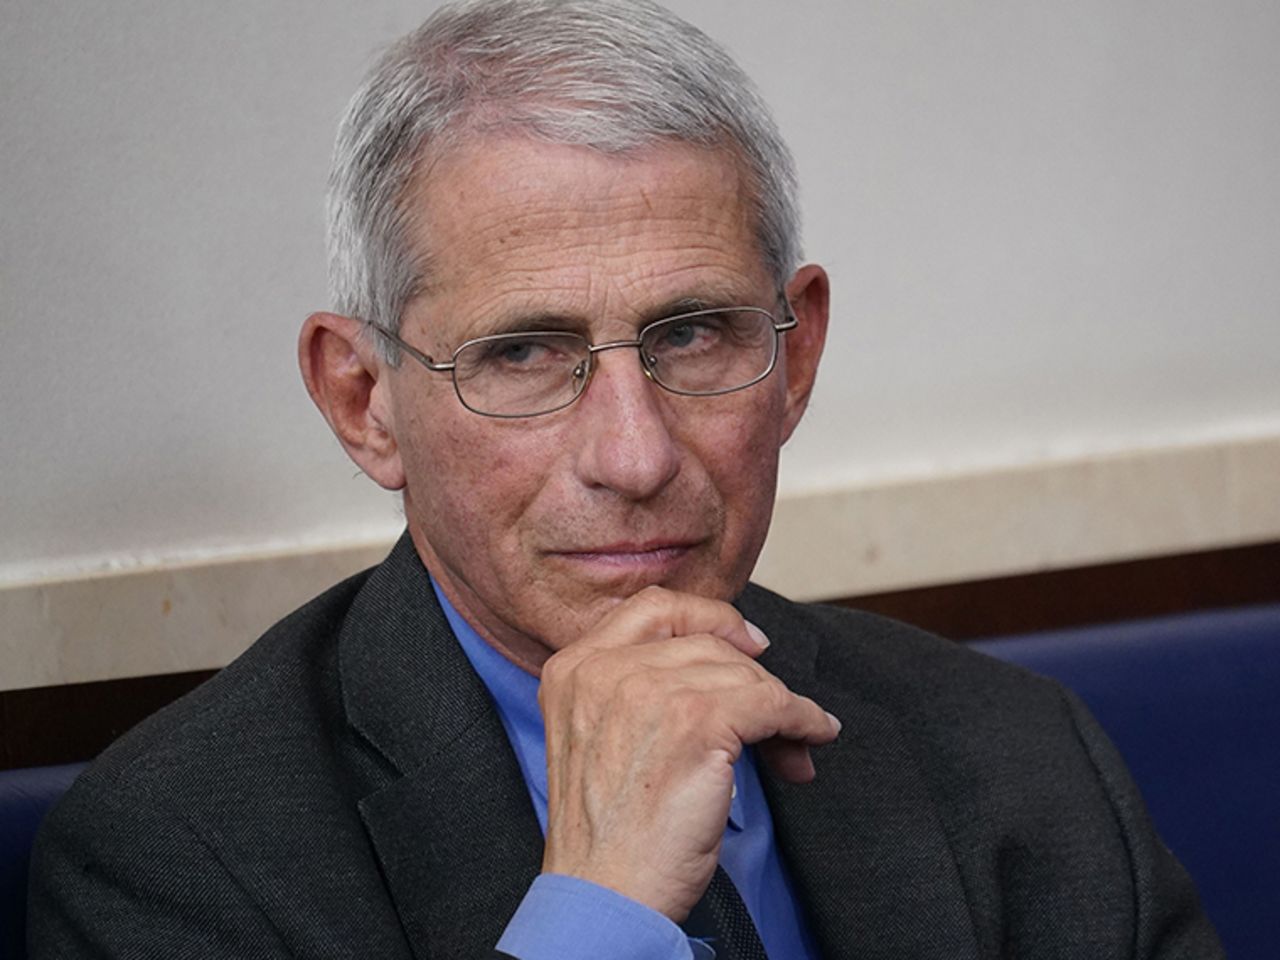 Director of the National Institute of Allergy and Infectious Diseases Anthony Fauci looks on during the daily briefing on the novel coronavirus at the White House on Tuesday, April 7.